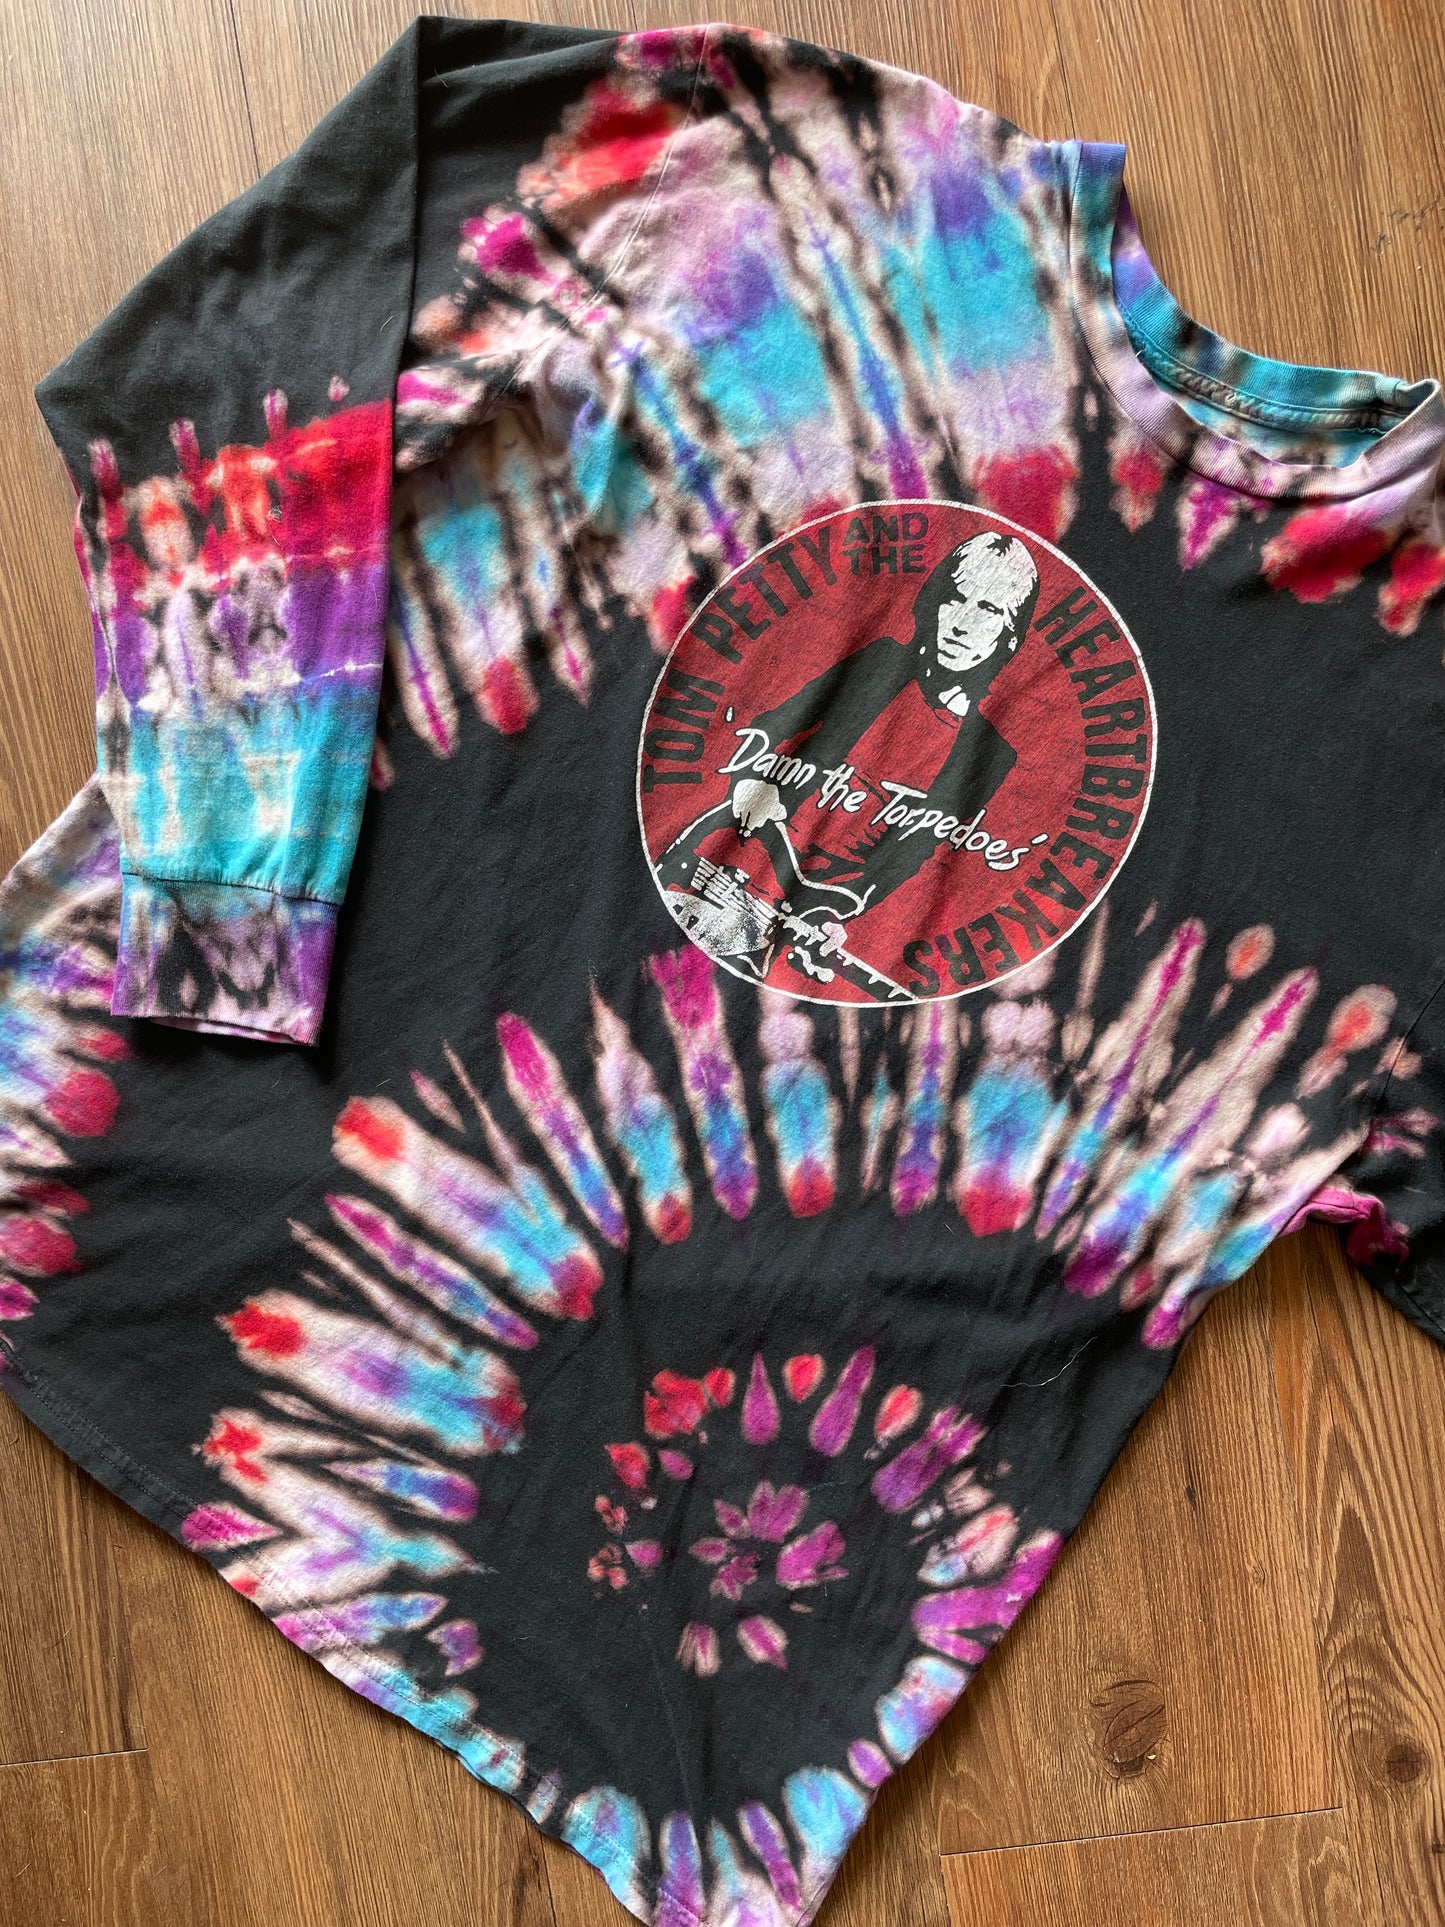 LARGE Men’s Tom Petty & The Heartbreakers Handmade Tie Dye T-Shirt | One-Of-a-Kind Black, Purple, and Red Spiral Long Sleeve